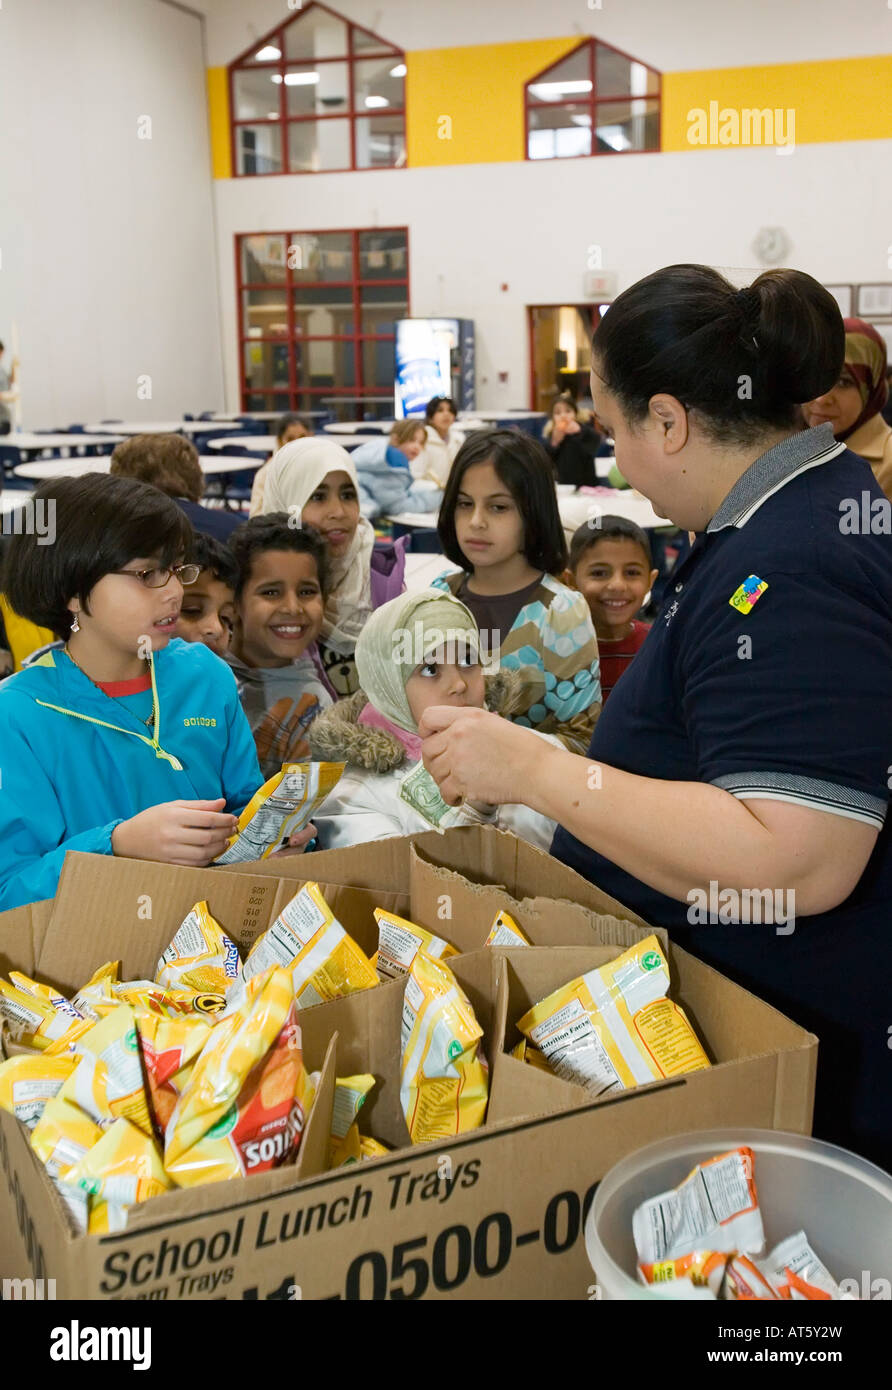 Dearborn Michigan Adilia Mohassen sells snacks in the cafeteria at Miller Elementary School Stock Photo